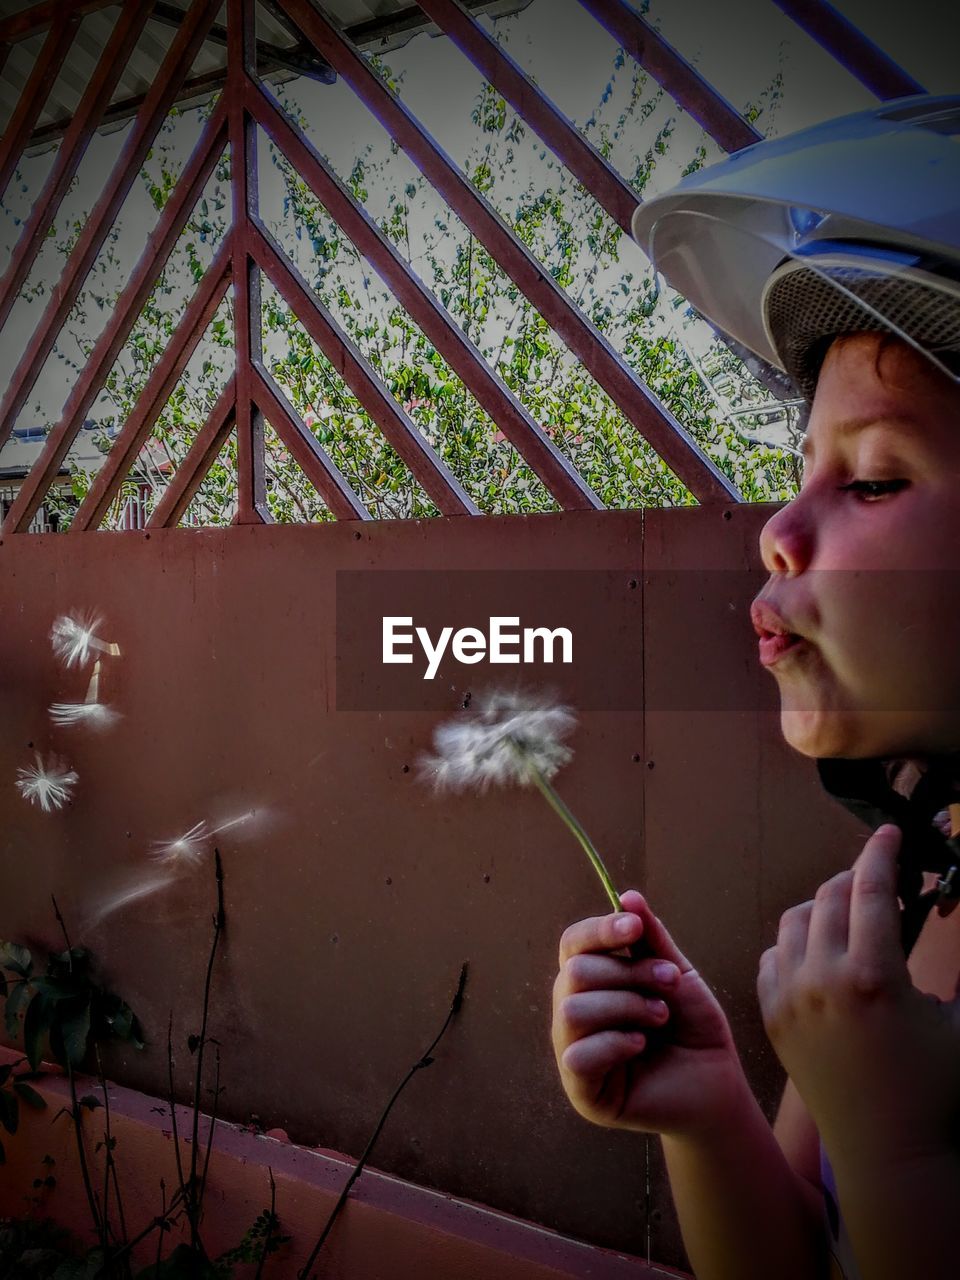 Cropped image of girl blowing dandelion seeds